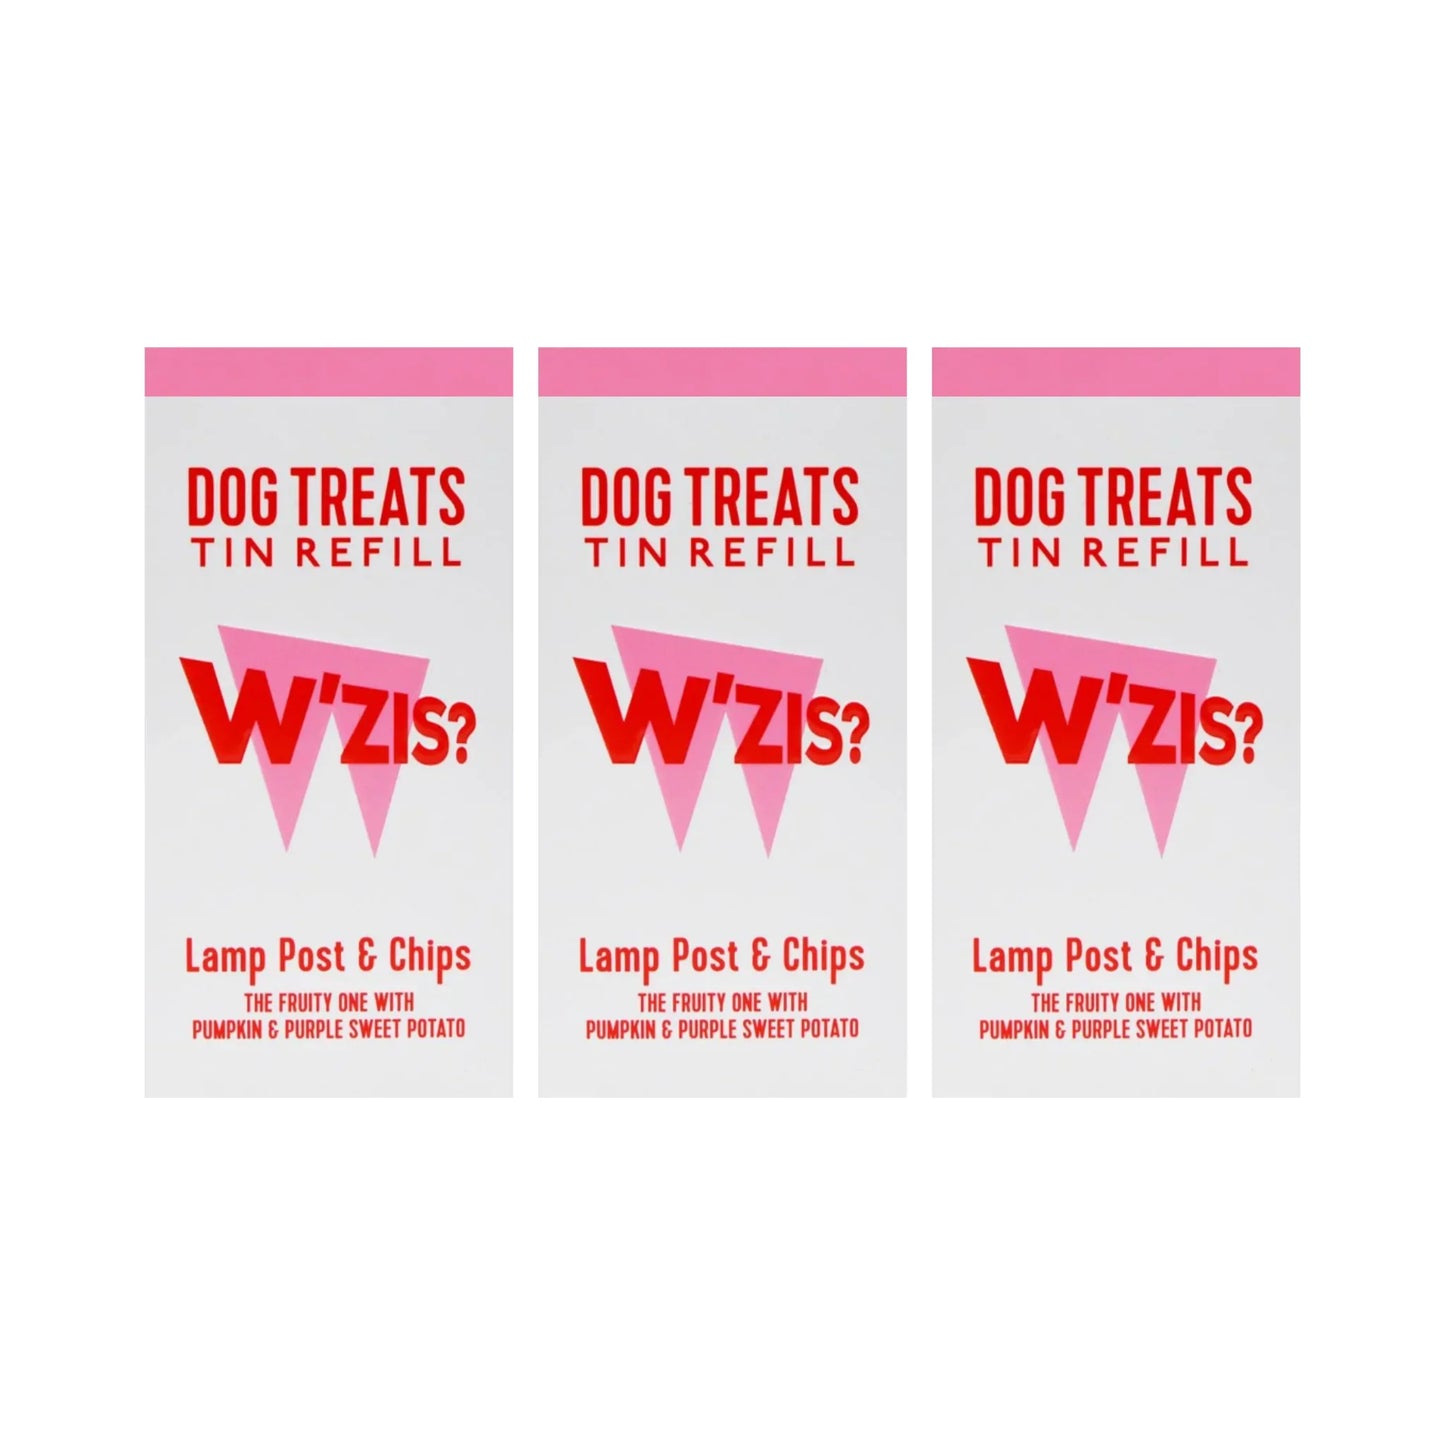 Wzis Dog Treats, Slipper & Biscuit (Green), Peanut Butter, Broccoli & Apple Flavour, Available In Quantities 100, 300 & 600